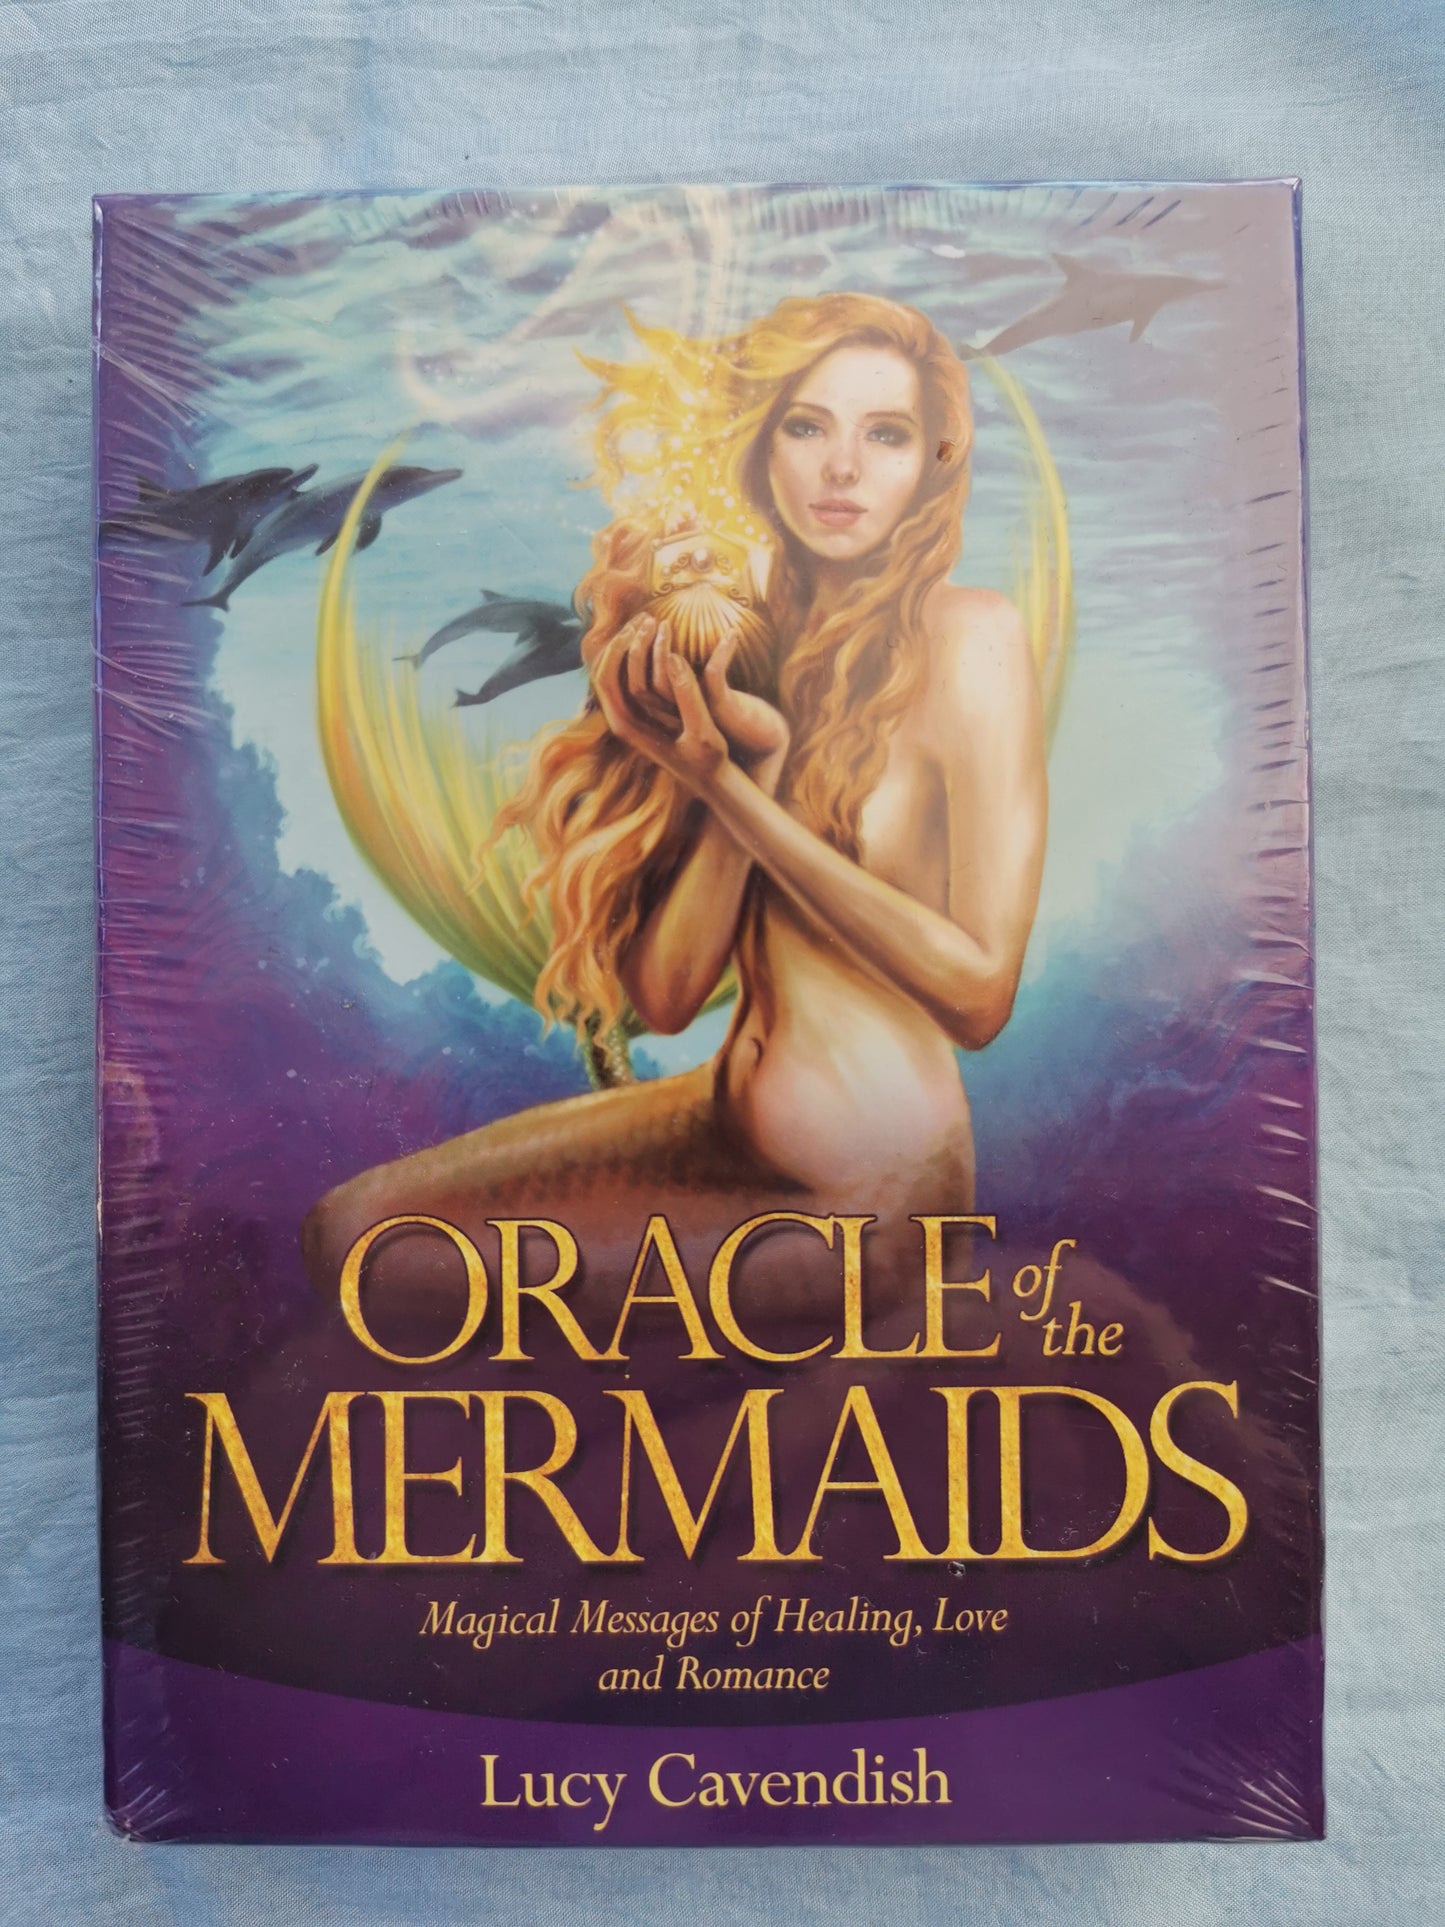 Oracle of the Mermaids - Magical Messages of Healing, Love and Romance